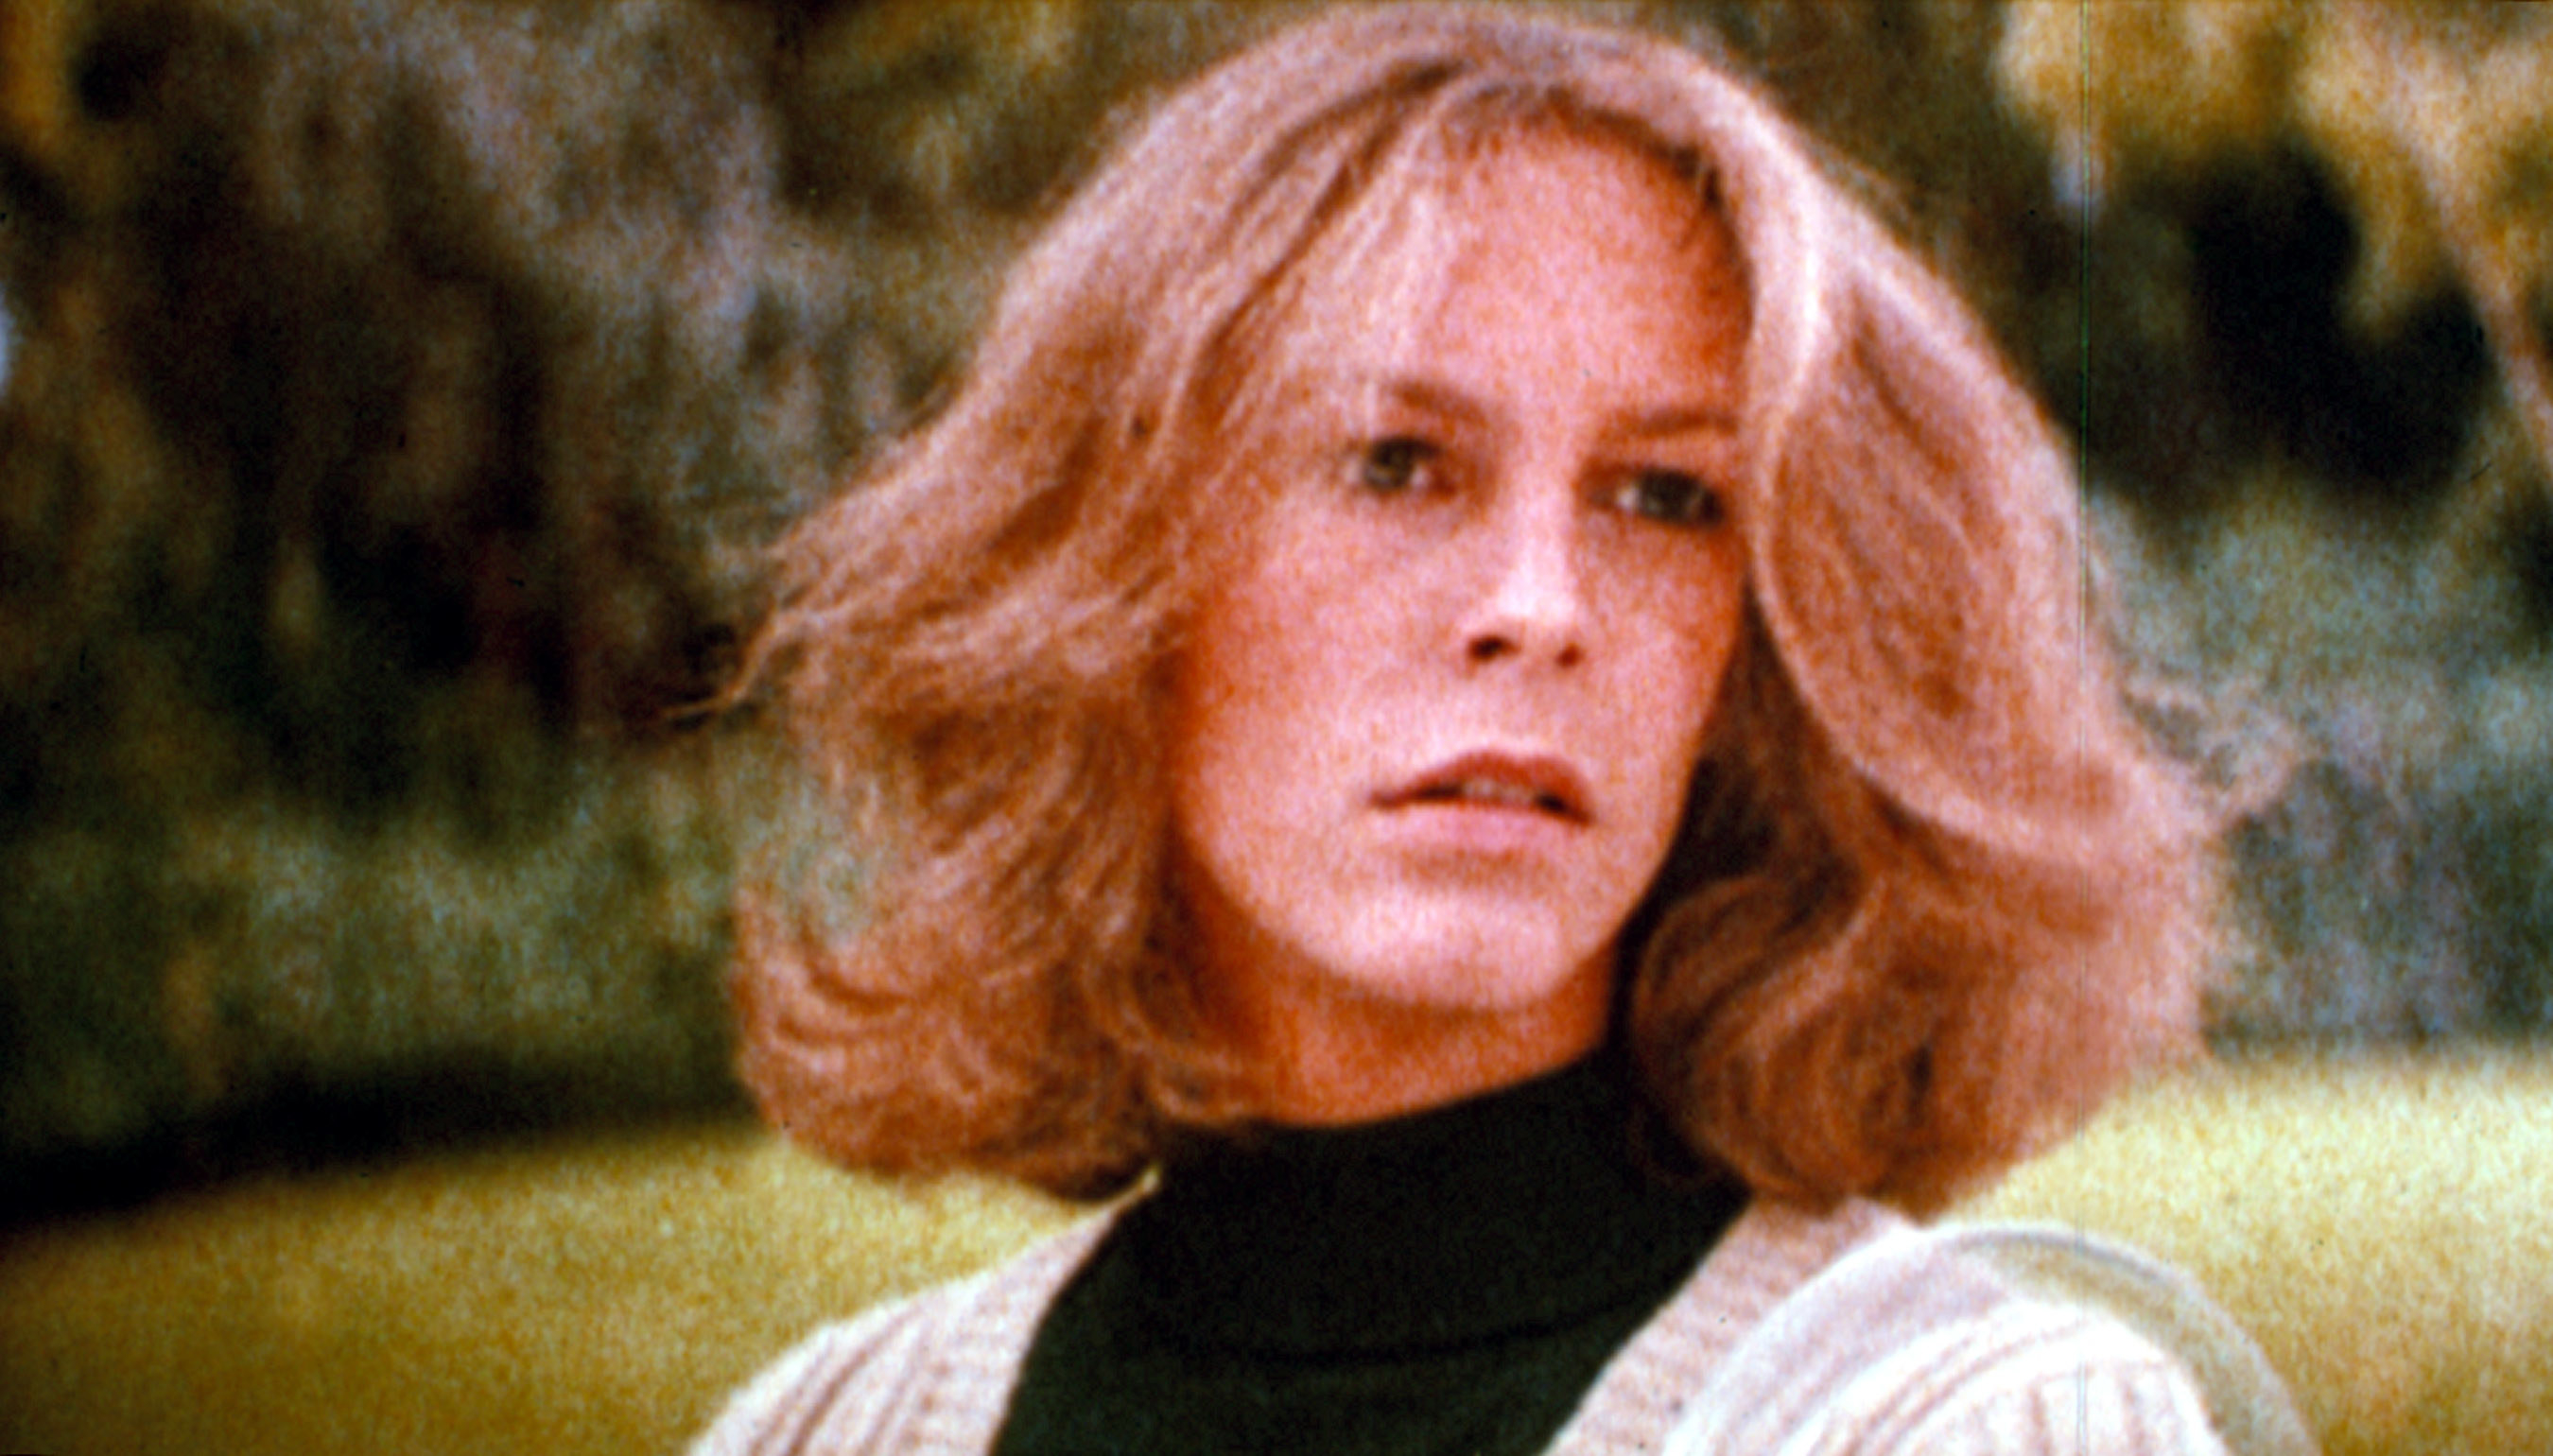 Laurie Strode looking at something